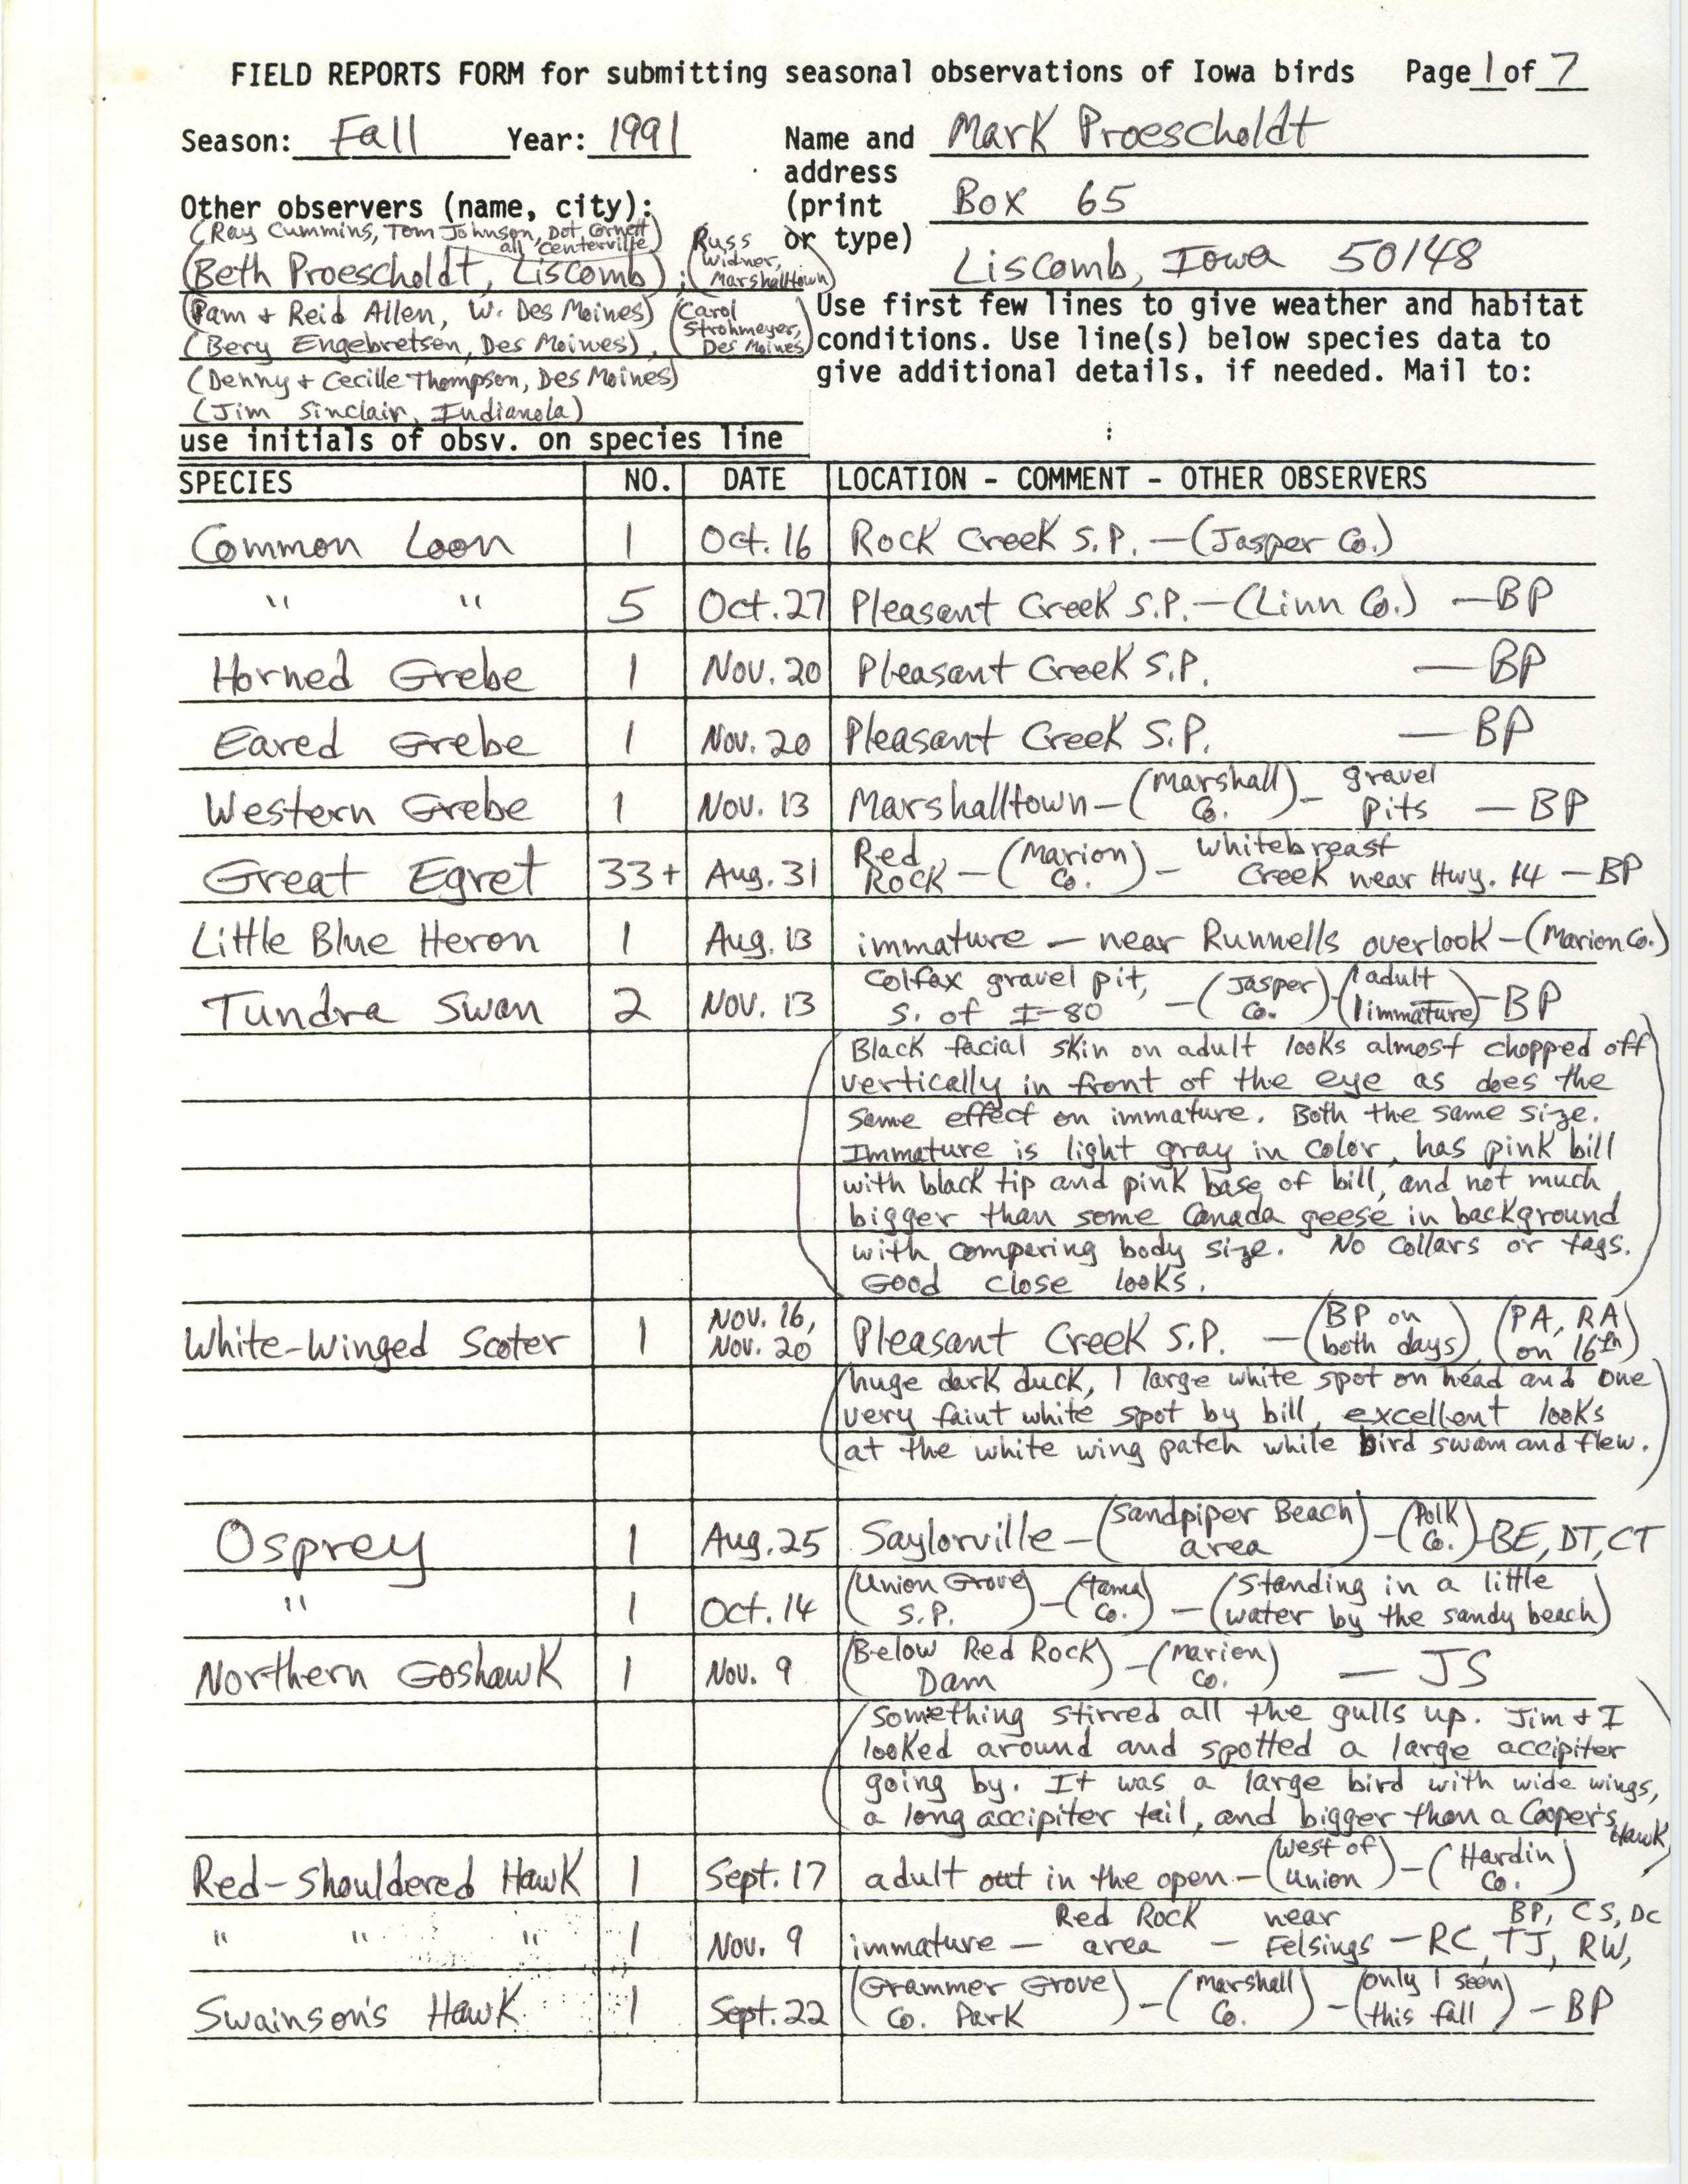 Field reports form for submitting seasonal observations of Iowa birds, Mark Proescholdt, November 25, 1991